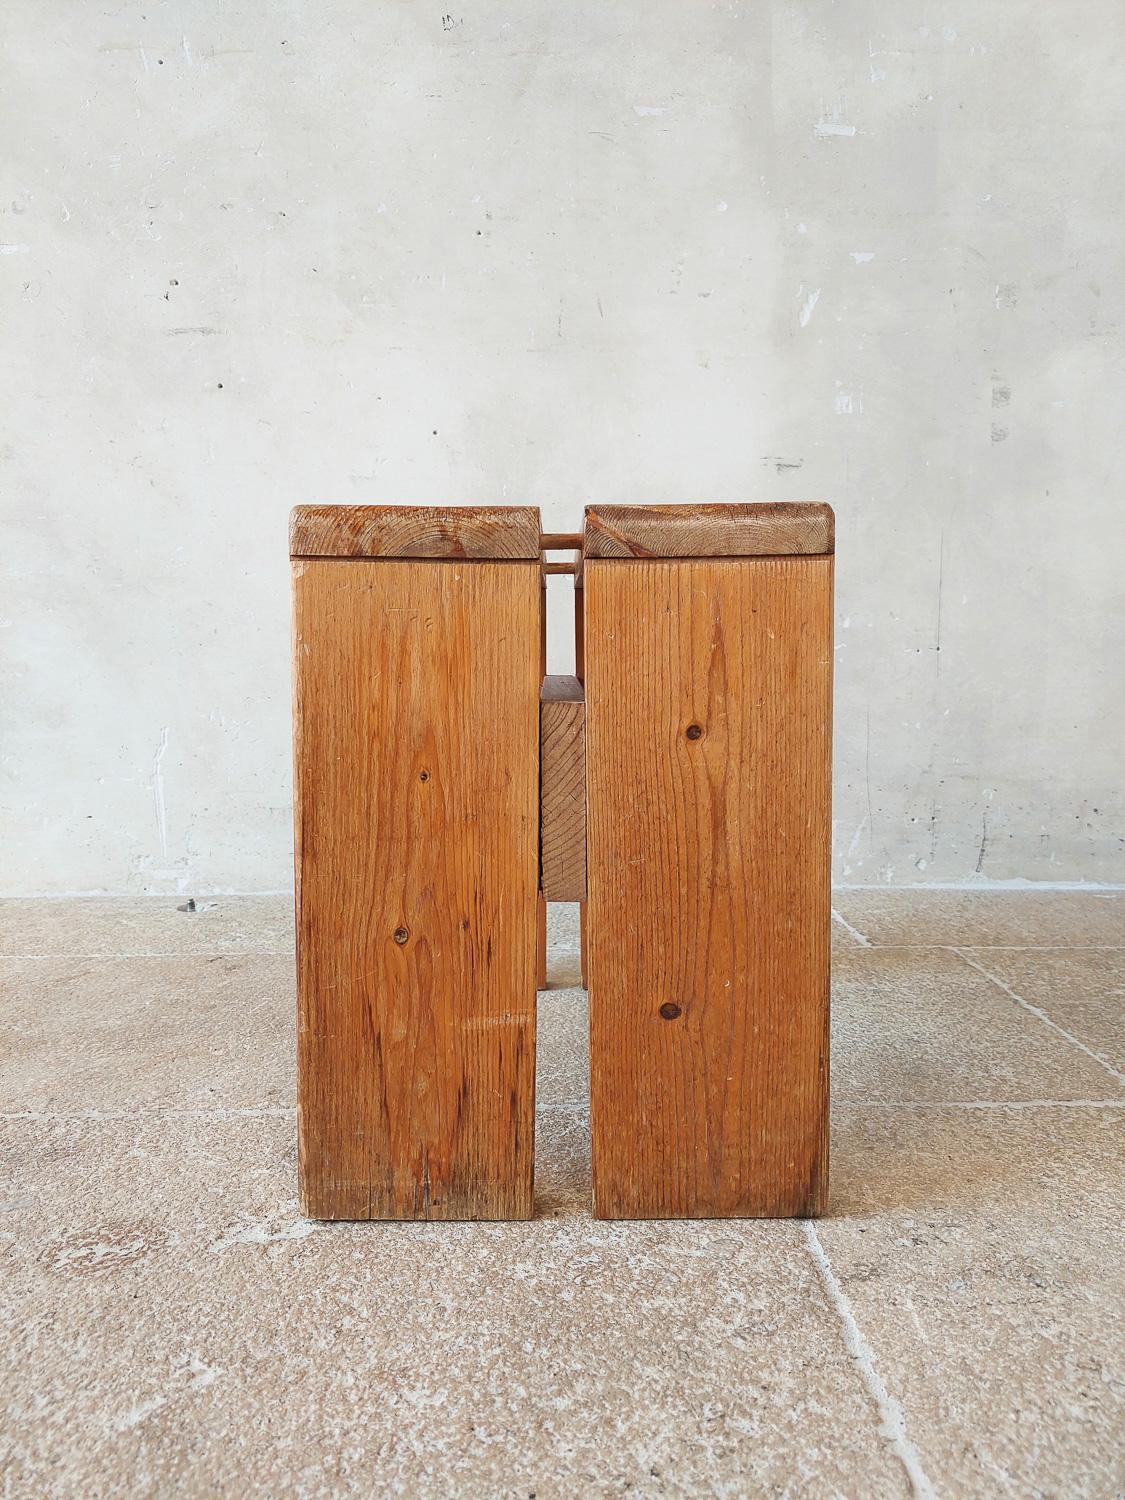 Charlotte Perriand Pine Wood Stool for Les Arcs, 1960s For Sale 4